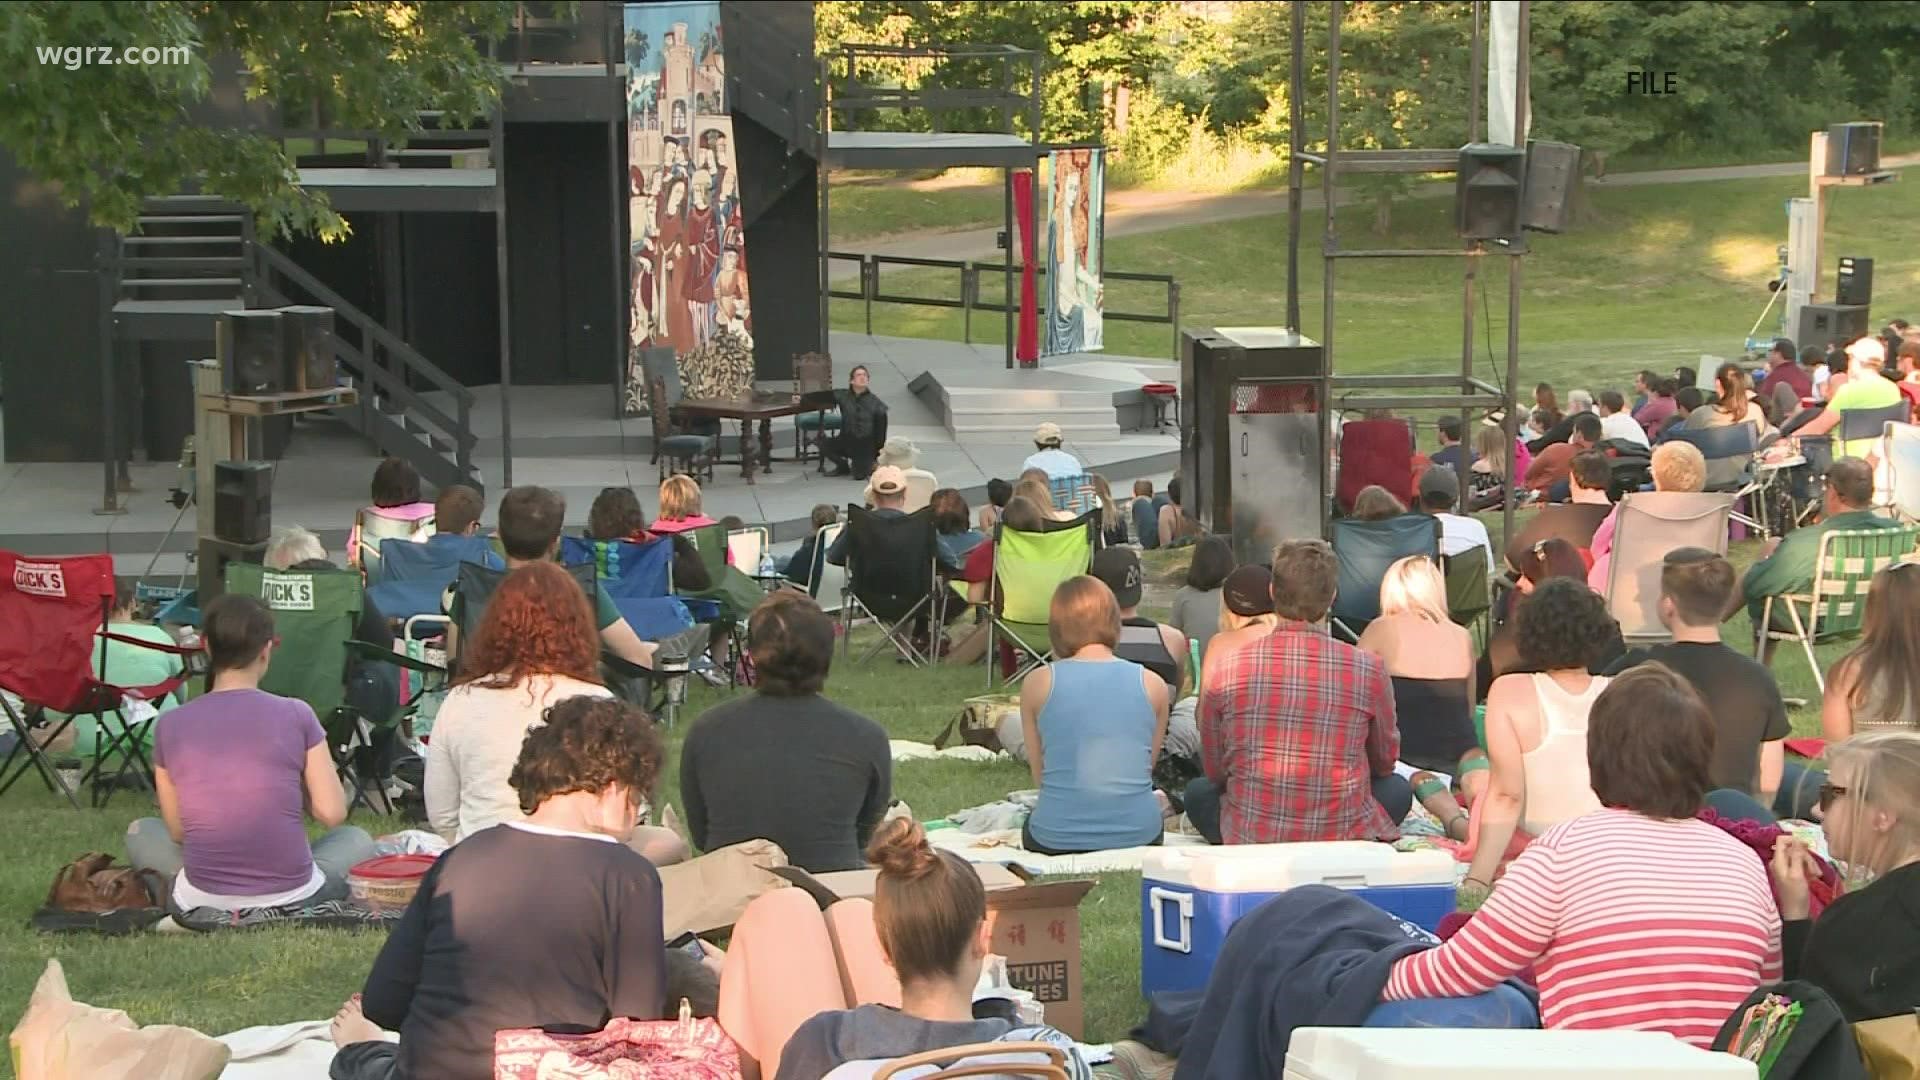 Changes coming to 'Shakespeare in the Park'